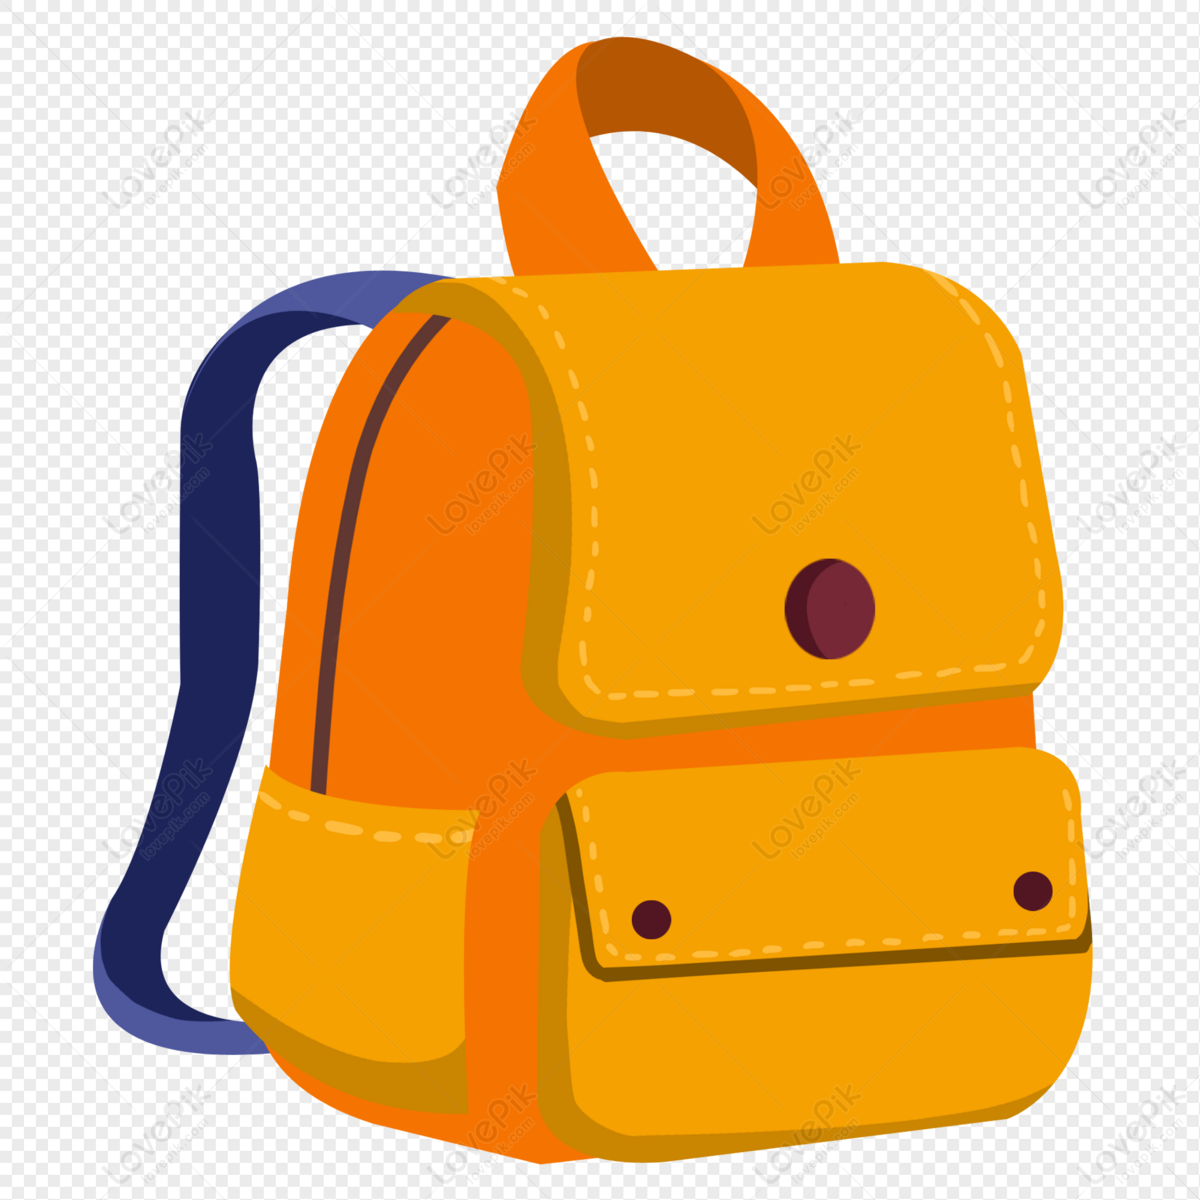 Cartoon Decorative Yellow School Bag PNG Image And Clipart Image For Free  Download - Lovepik | 401274738